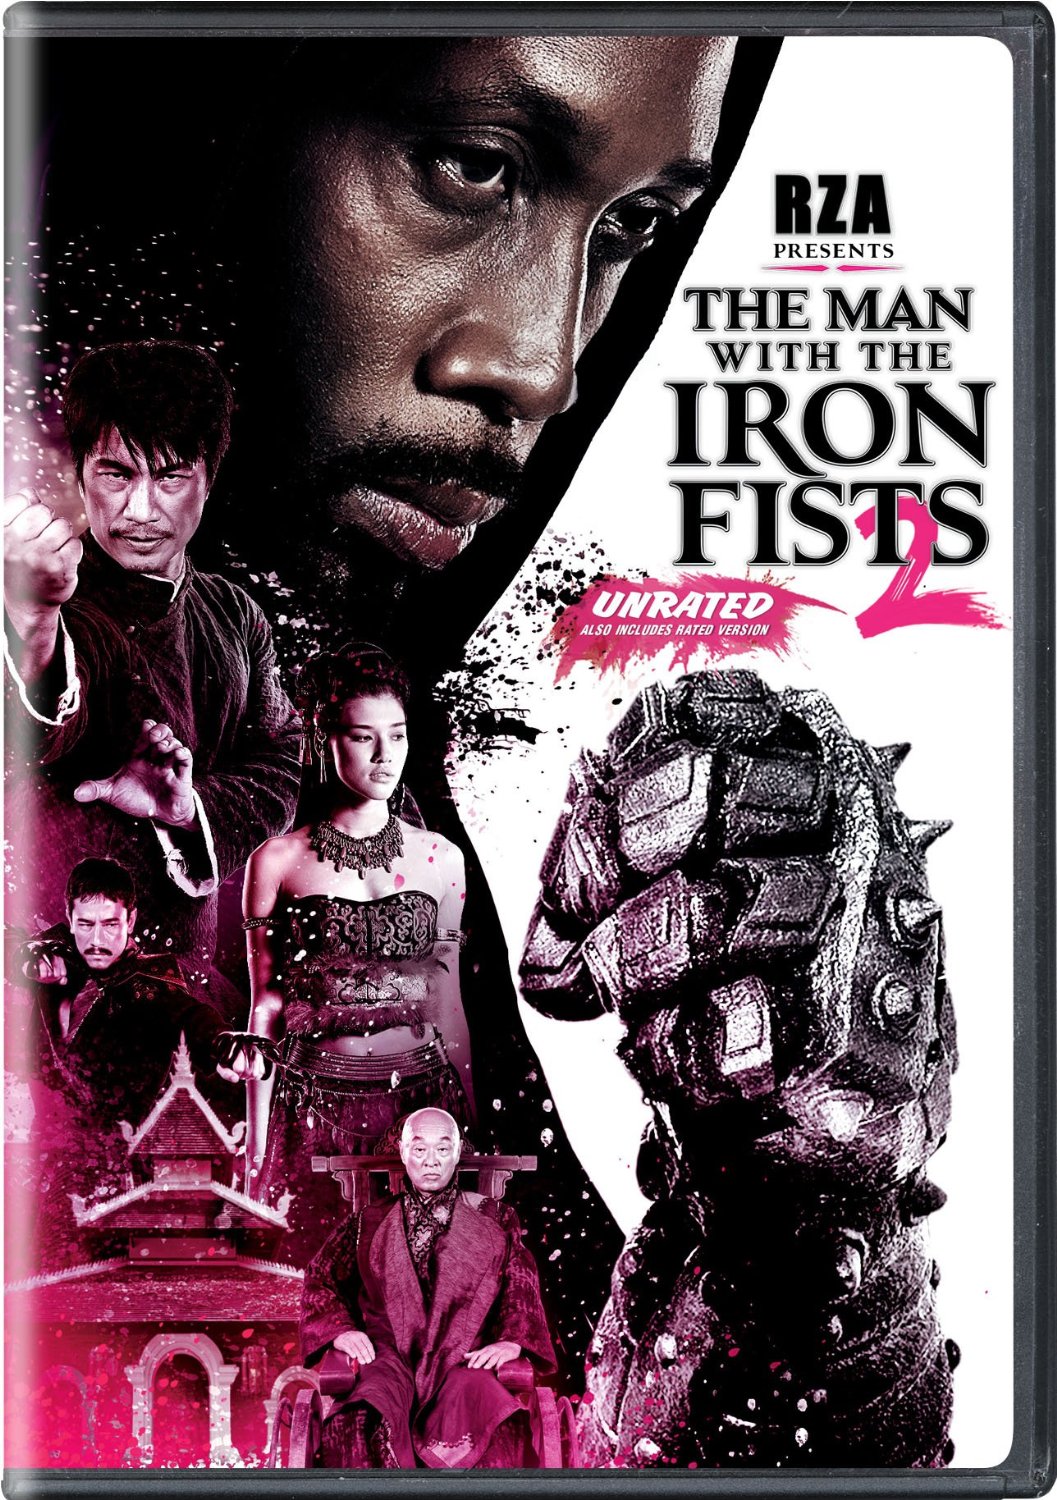 The Man with the Iron Fists 2 (2015)